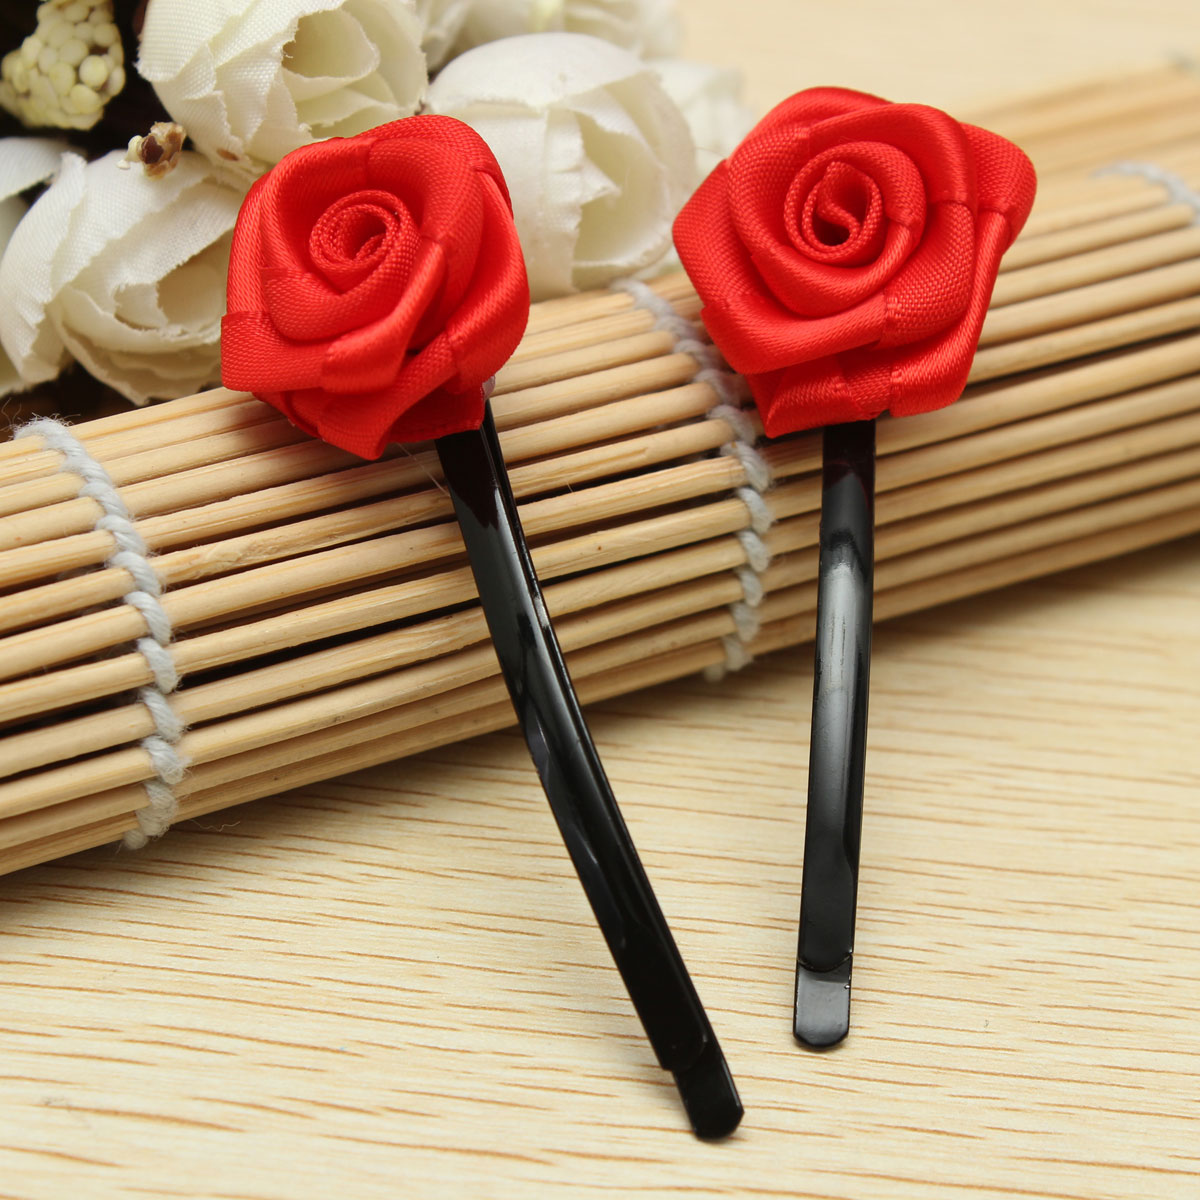 6pcs-Rose-Flowers-Hair-Pins-Grips-Clips-Accessories-for-Wedding-Party-1037583-11